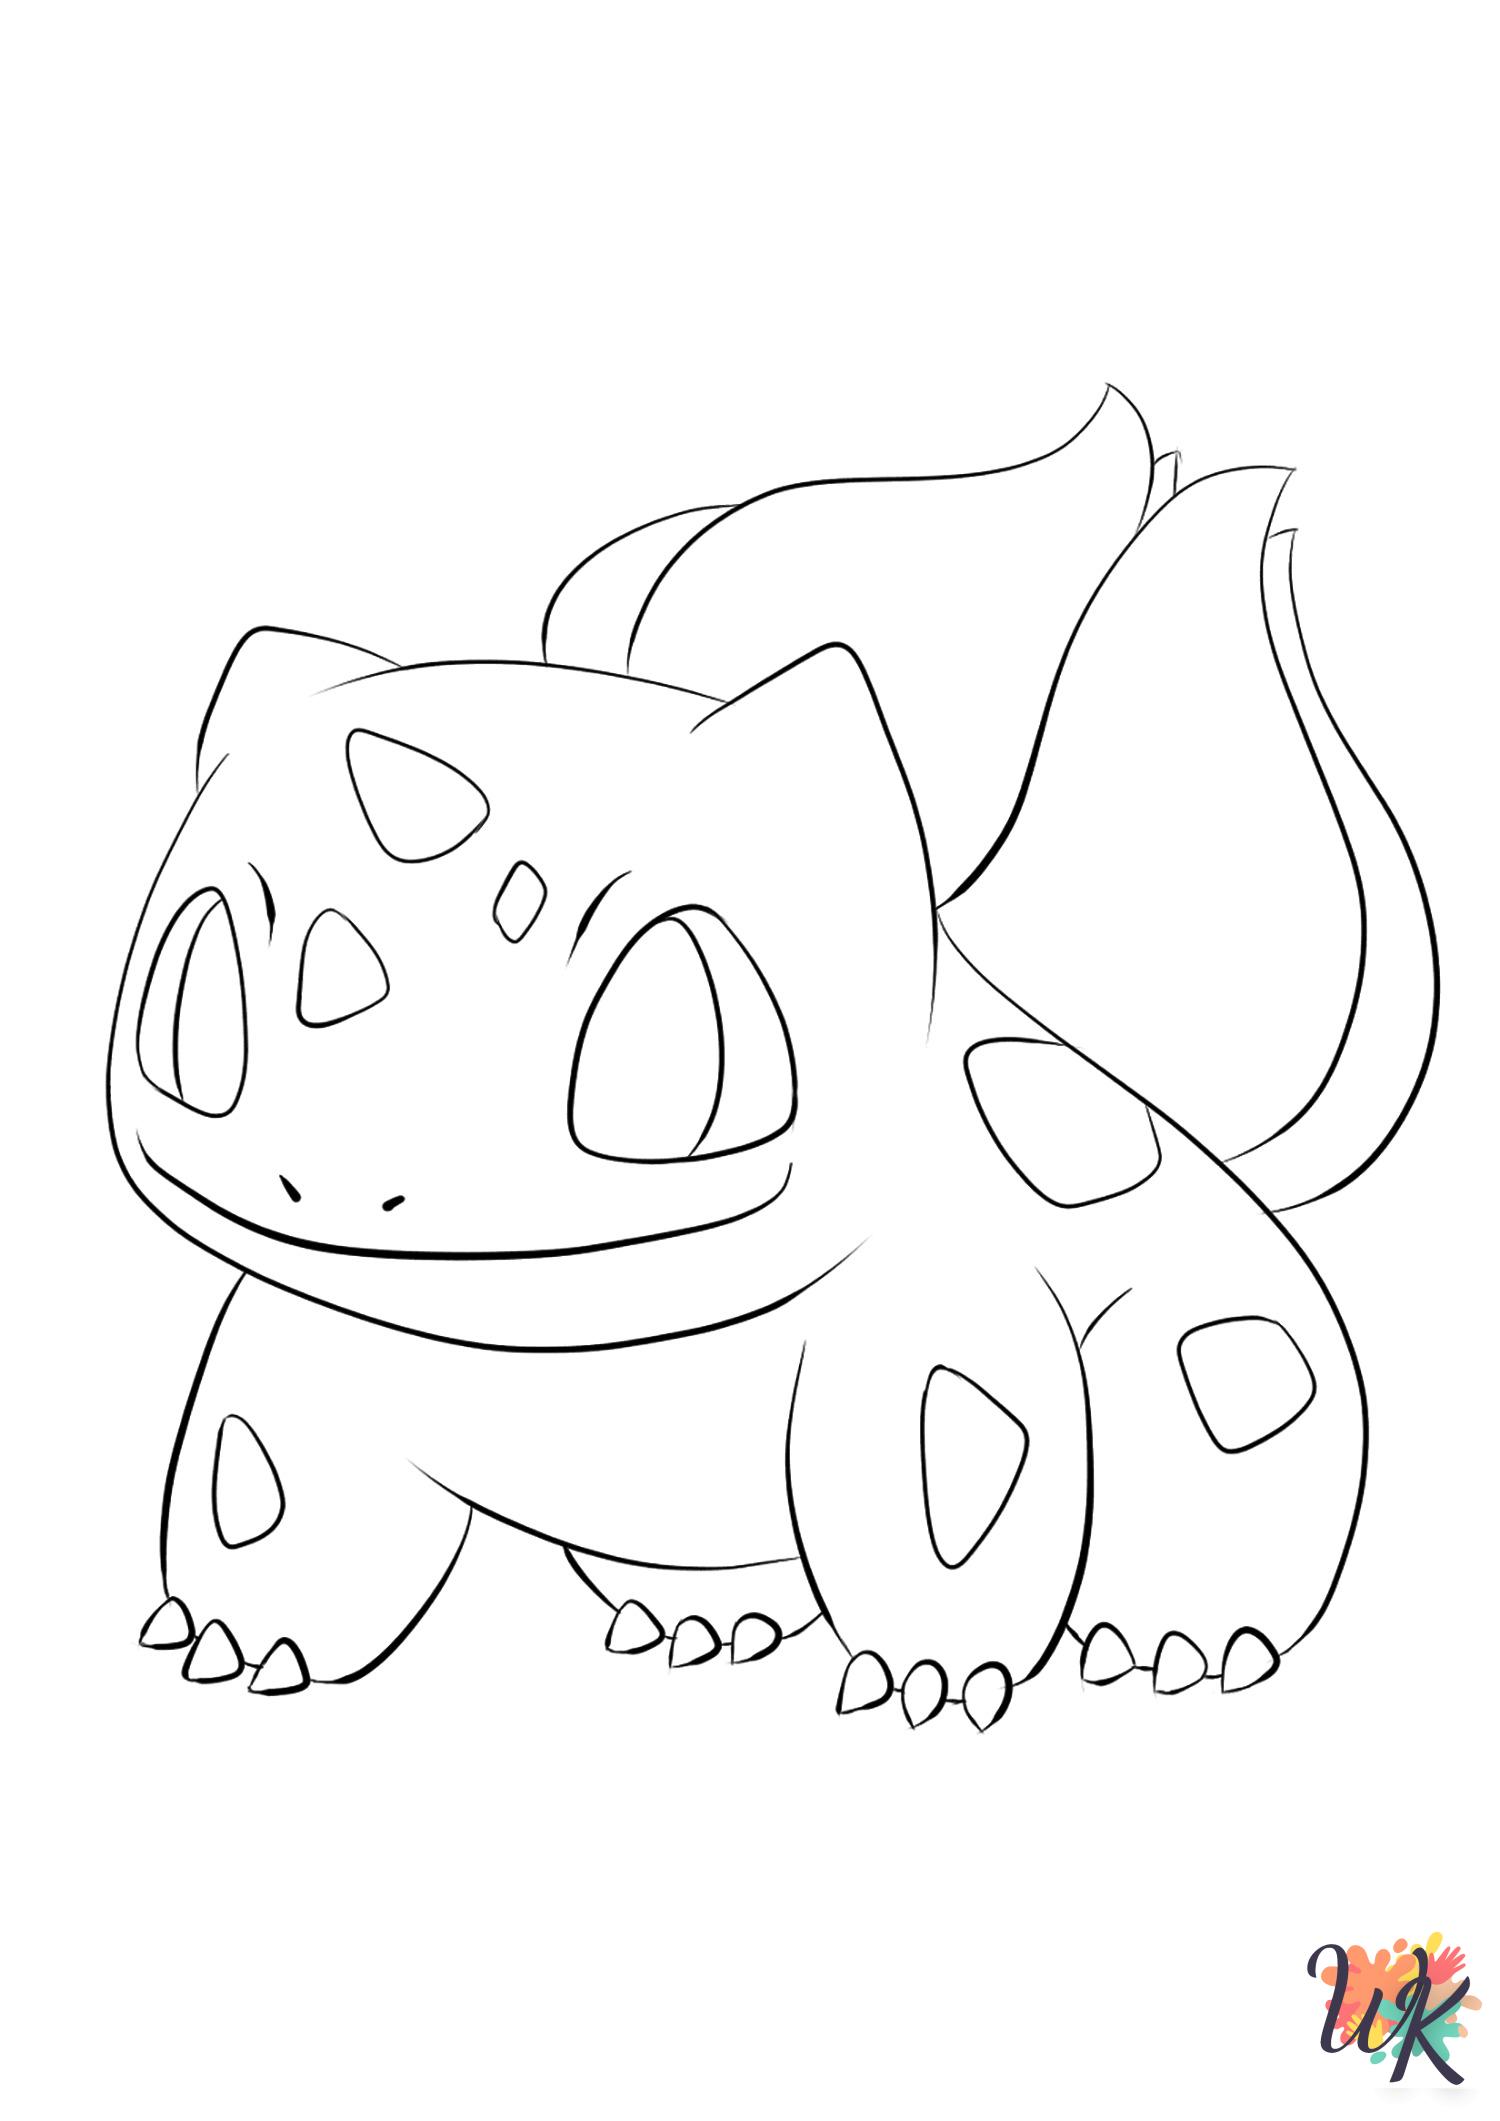 detailed Bulbasaur coloring pages for adults